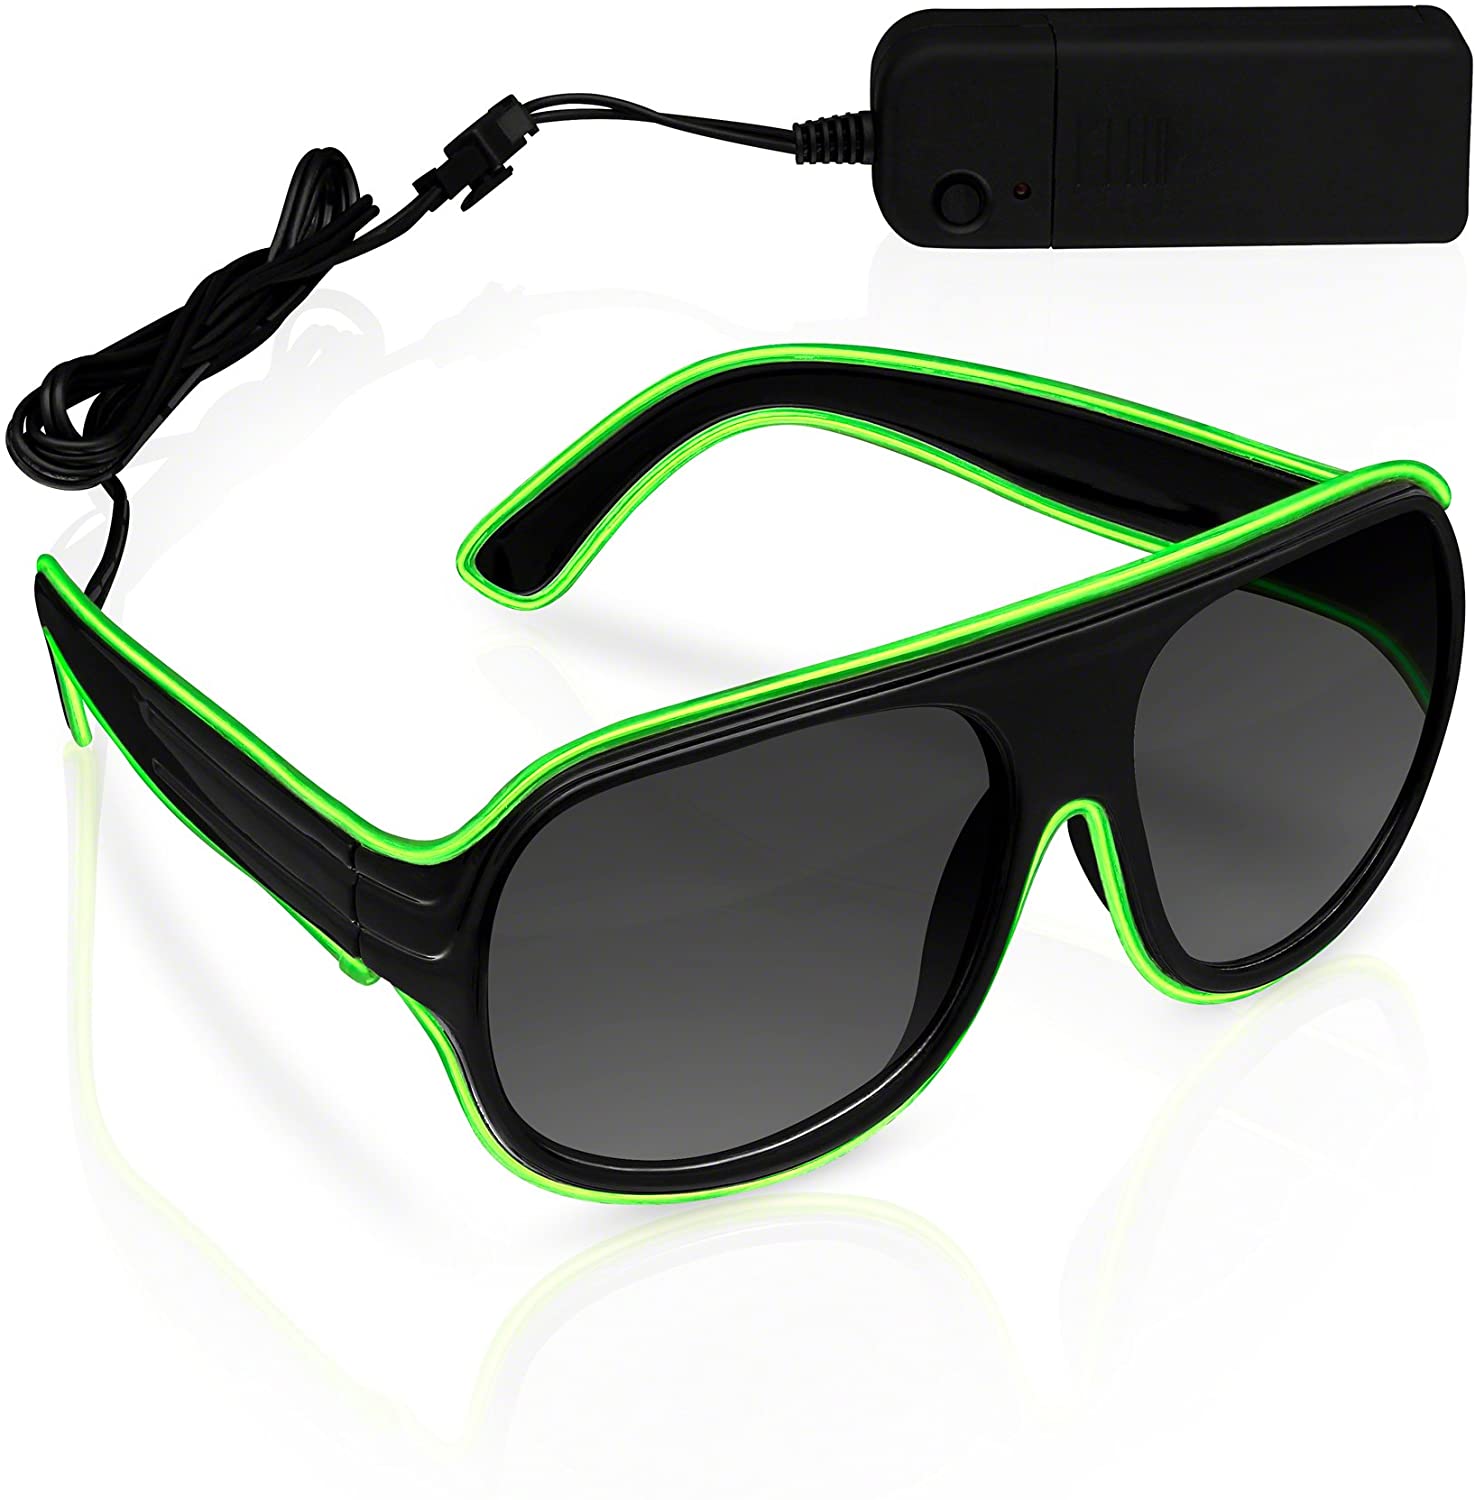 Electro Luminescent Banray Sunglasses Green All Products